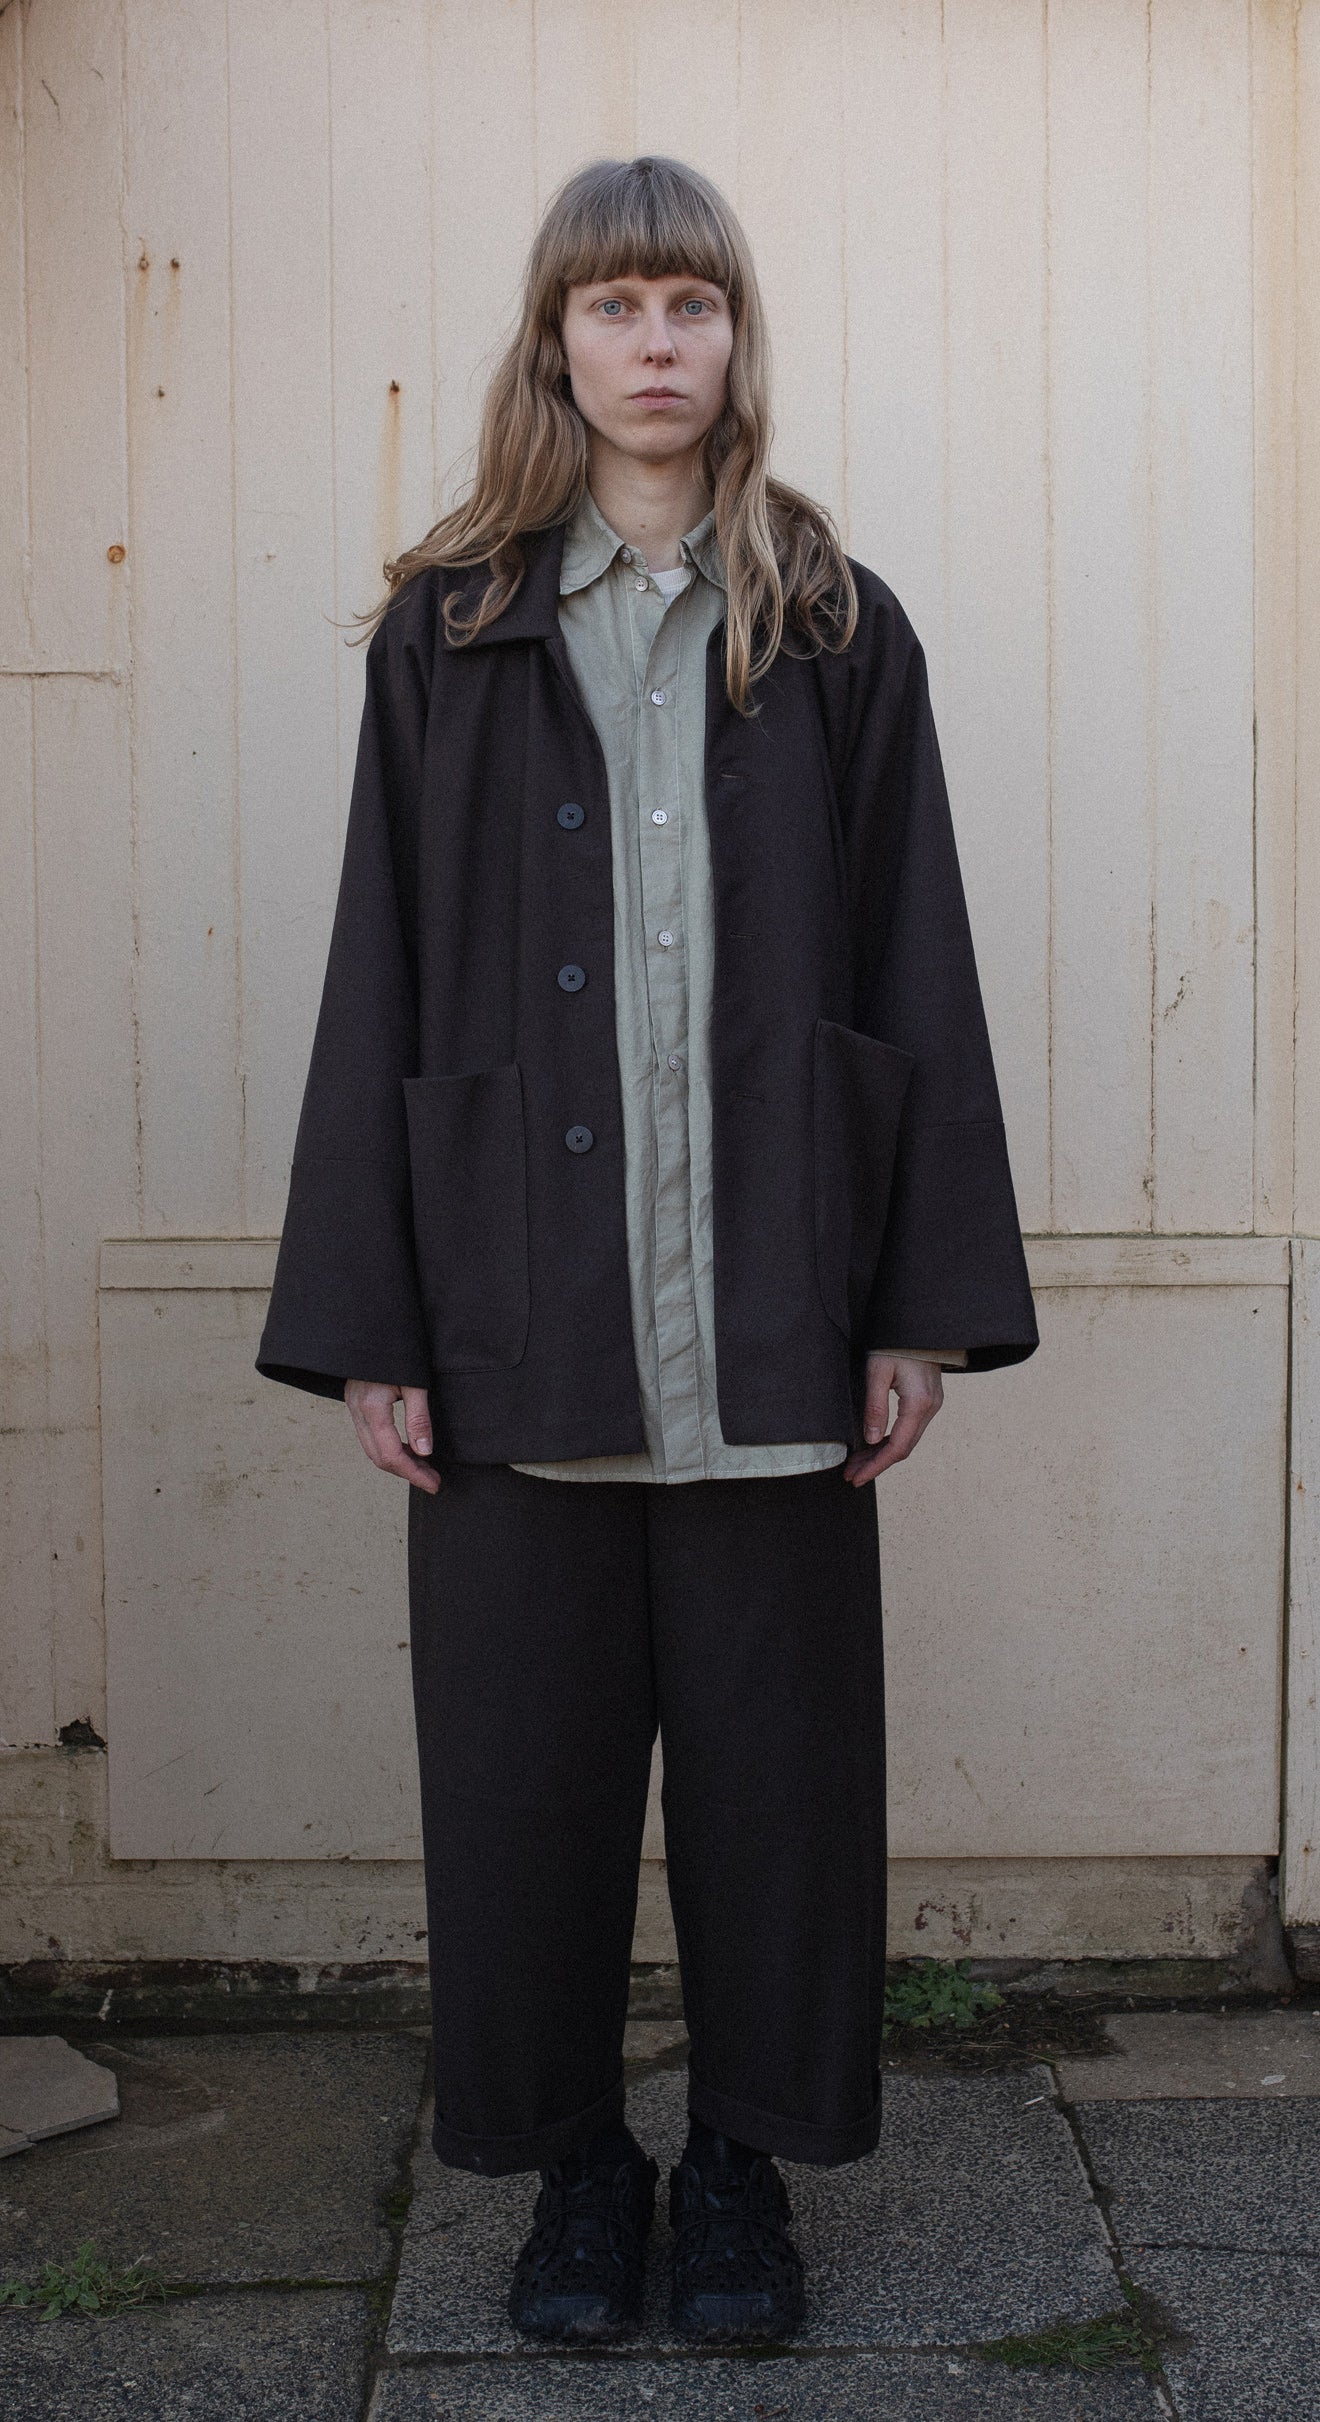 Gatherers Trousers - Clove